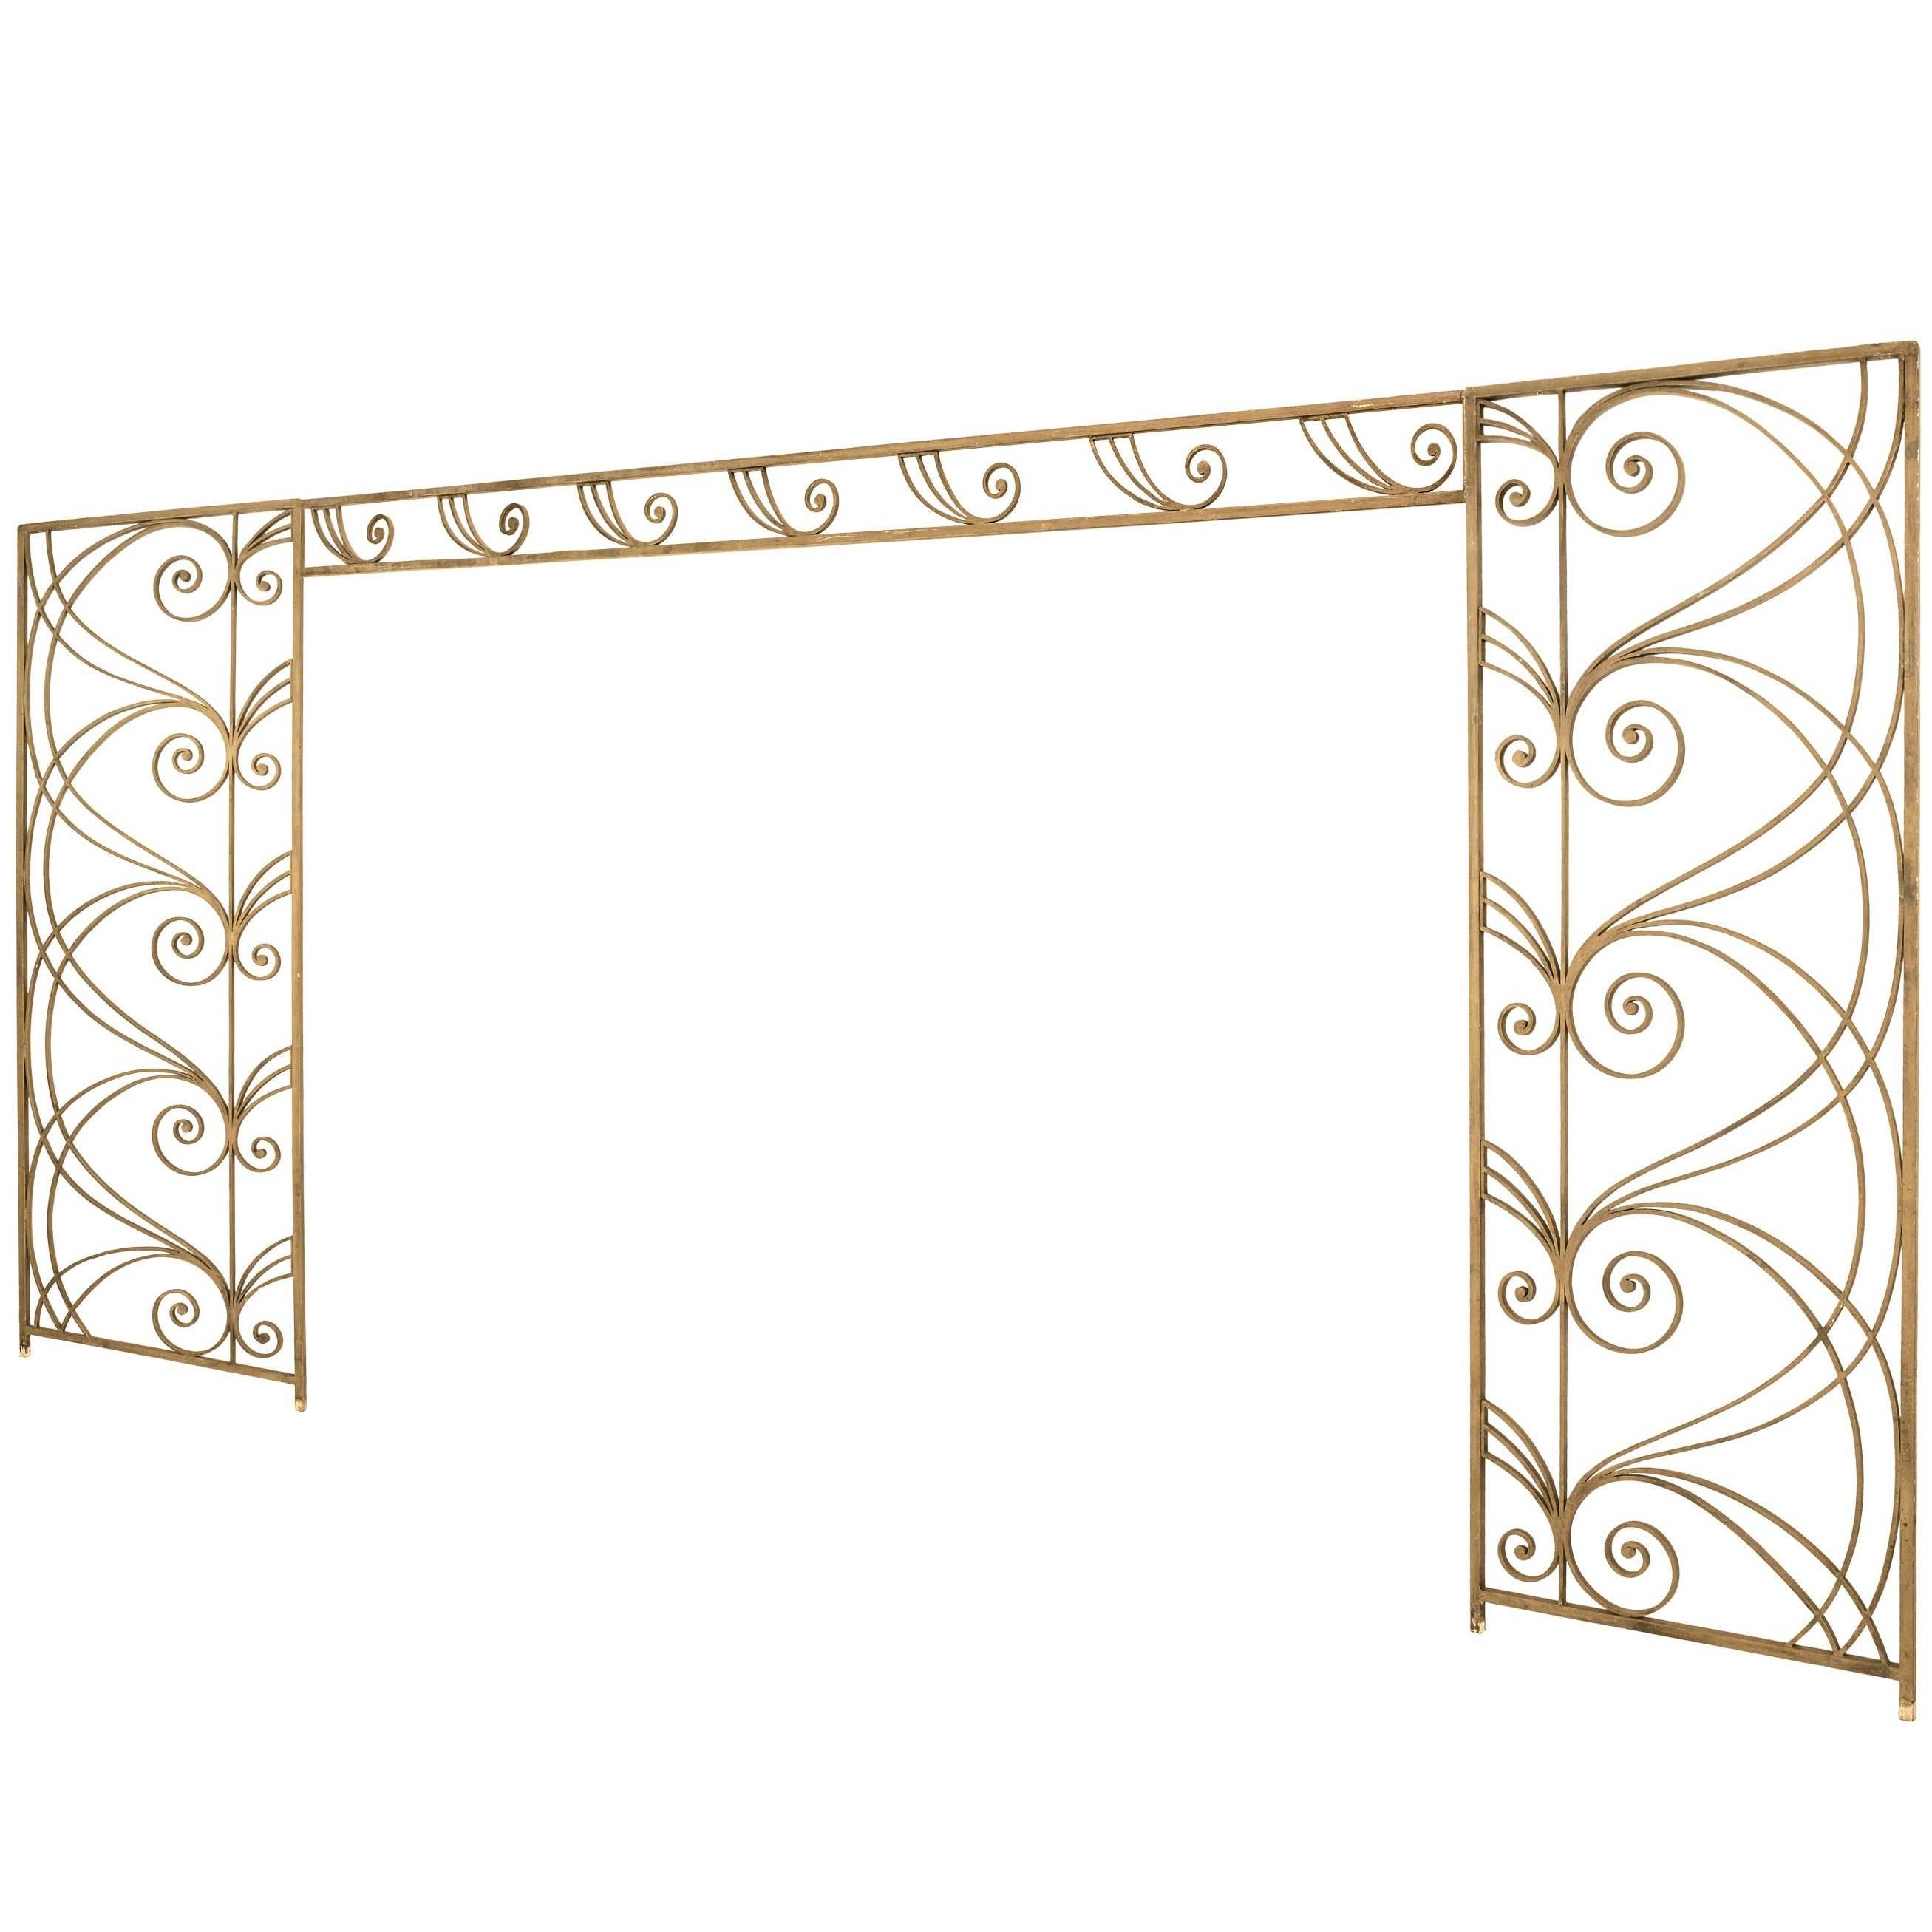 Gold Painted Iron Room Divider with Scrolls